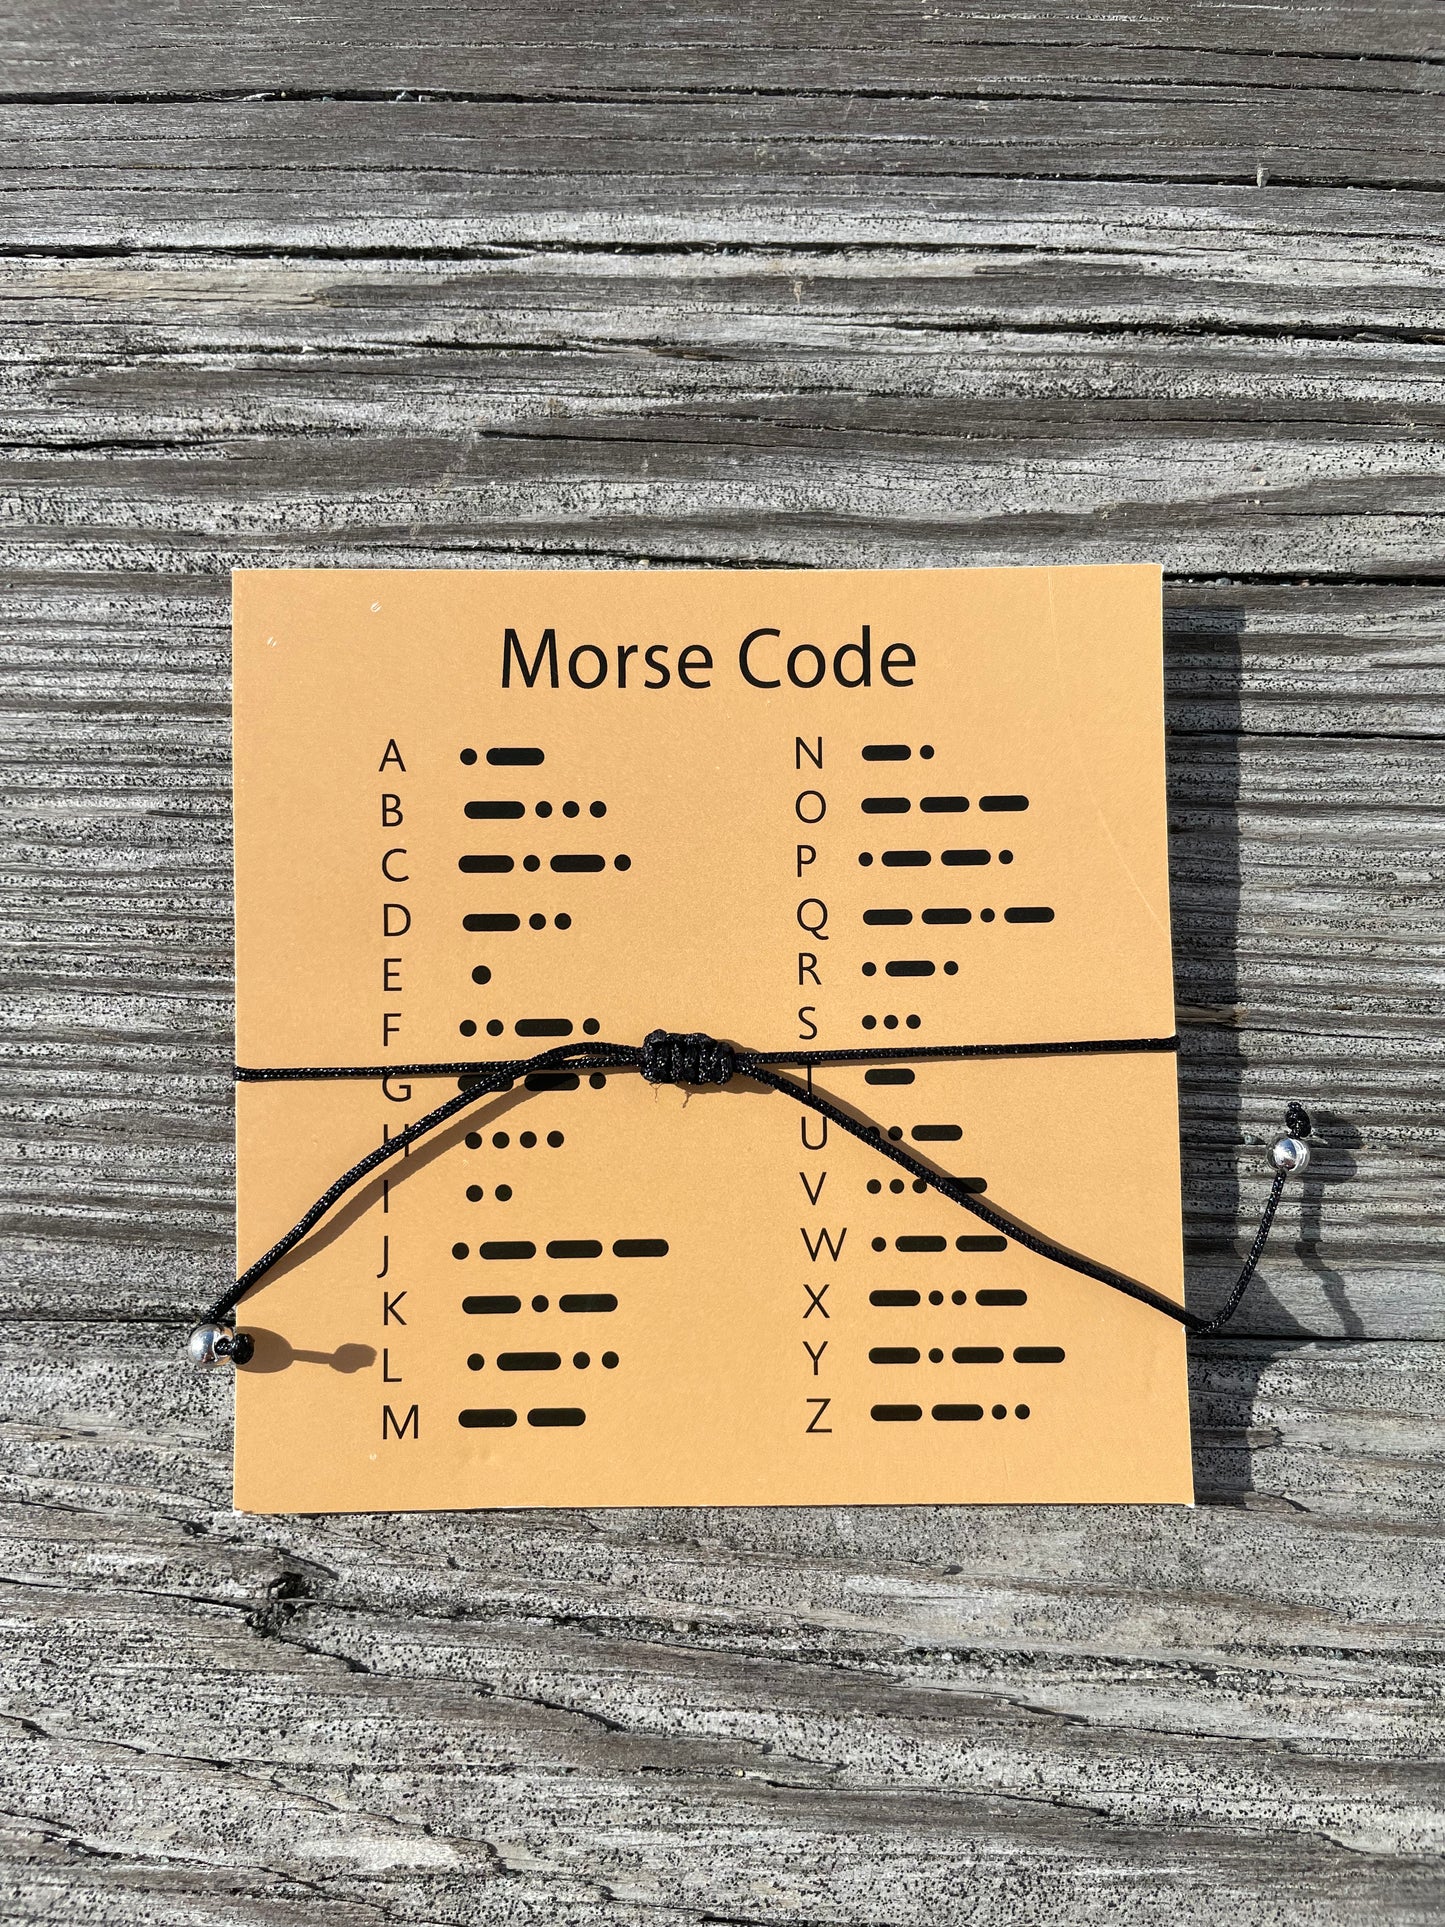 Back of card with morse code dot meanings for alphabet from A-Z